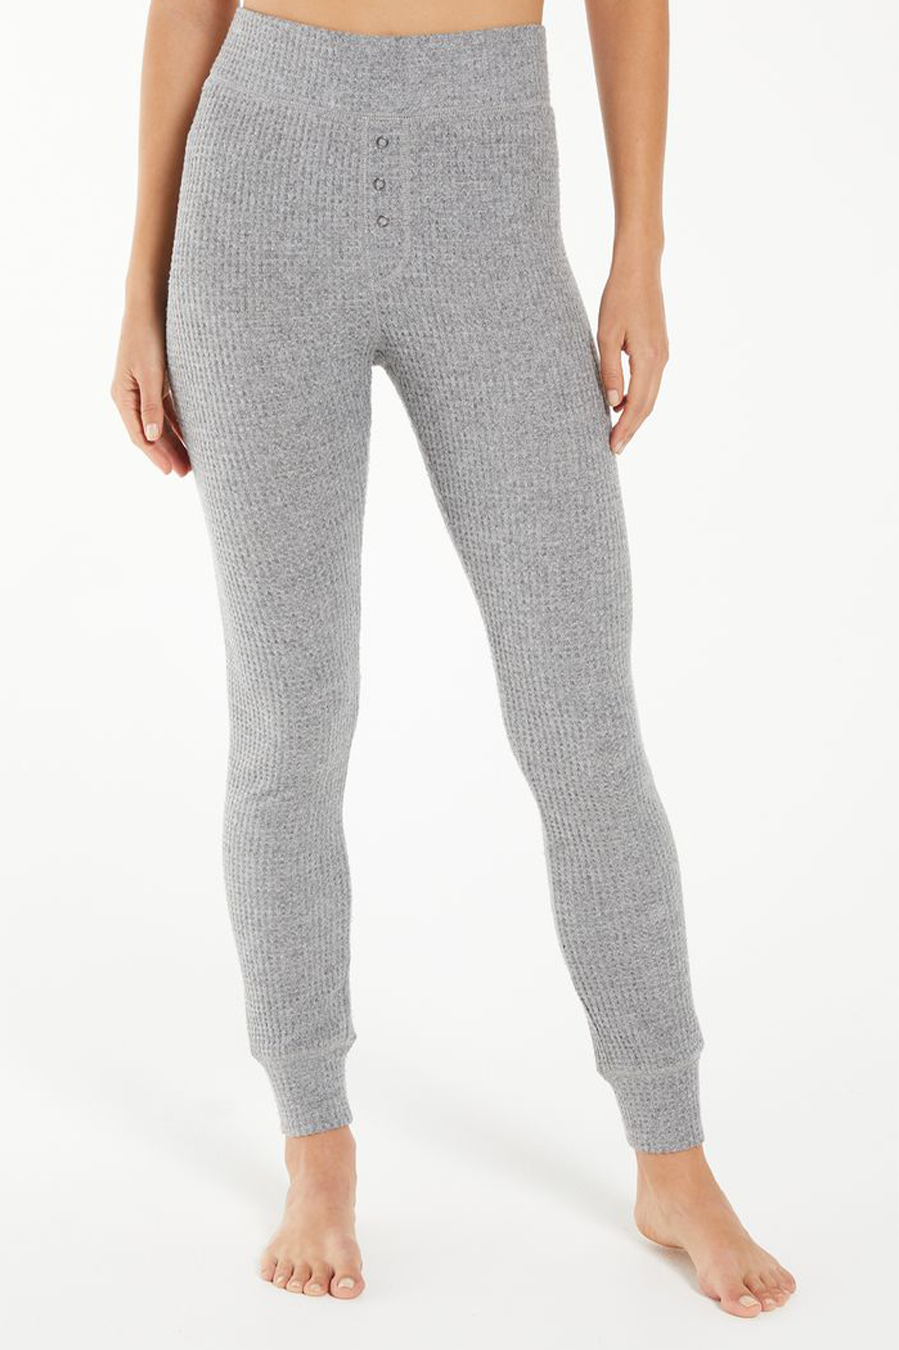 Lover Thermal Legging | Heather Grey - Main Image Number 1 of 1